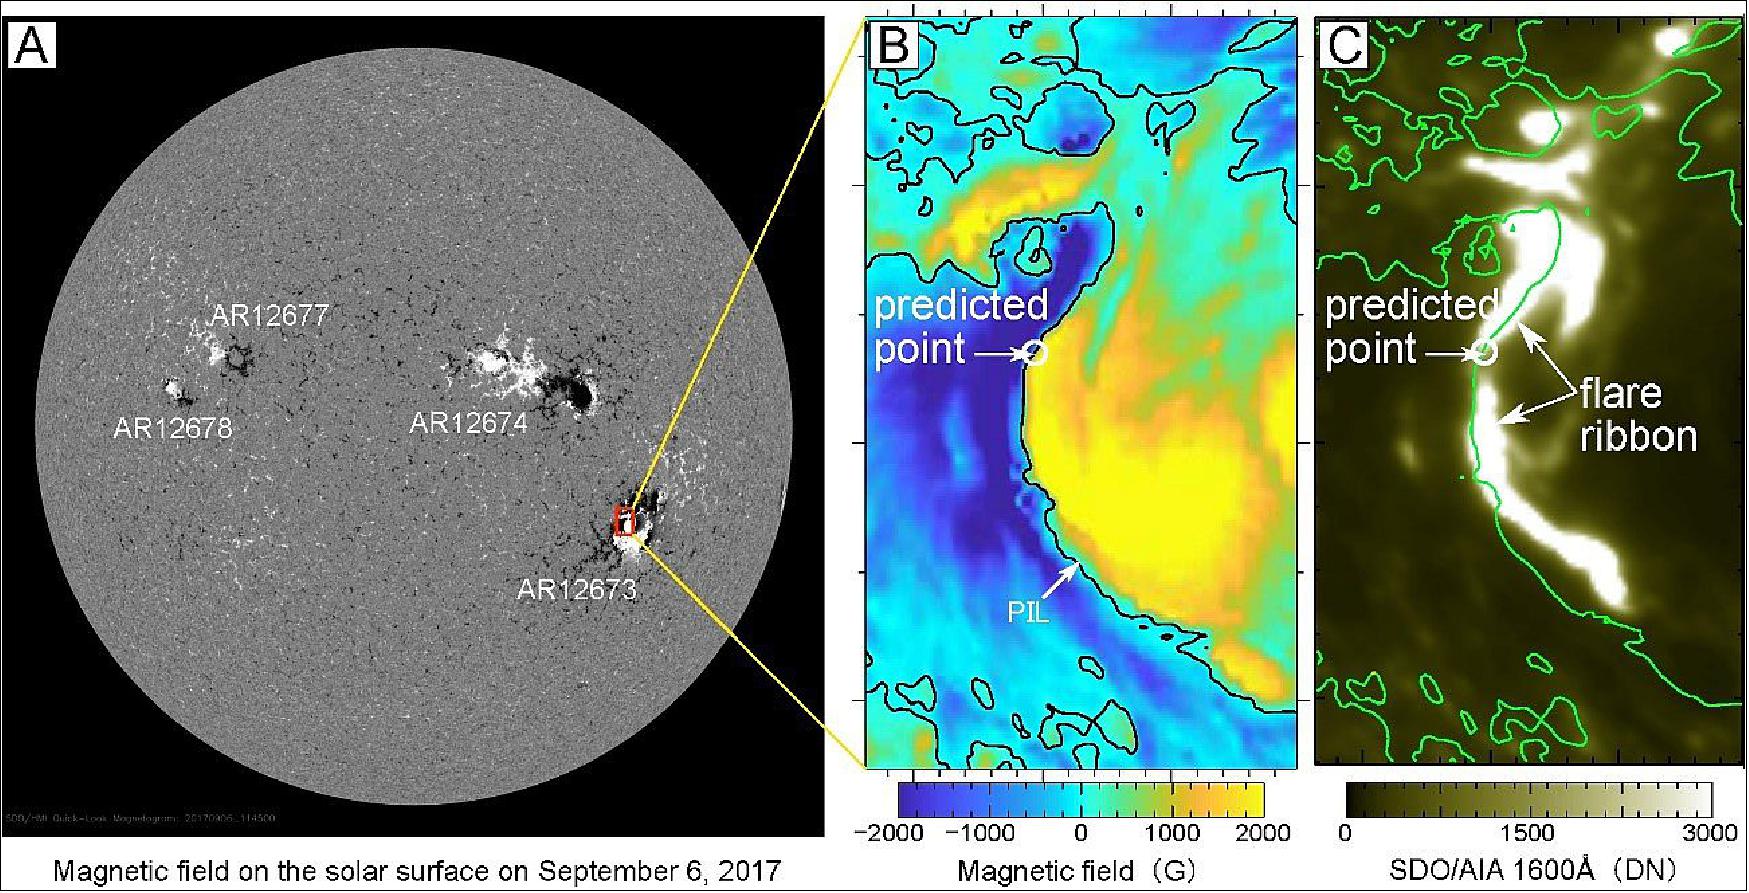 Figure 35: The magnetic field on the solar surface and the initial brightening of the largest solar flare (GOES class X9.3) during solar cycle 24 in NOAA Active Region (AR) 12673 on Sep. 6, 2017. This was observed by the Helioseismic and Magnetic Imager (HMI) and the Atmospheric Imaging Assembly (AIA) onboard the NASA's Solar Dynamics Observatory (SDO) satellite. A: The magnetic field on the solar surface before the onset of the large flare at 11:45 UT. White and black indicates the intensity of the magnetic field along the line of sight out of and toward the plane. B: An expanded view of the vertical magnetic field in AR 12673. A white circle indicates the location where a large flare was predicted by this study. The black contour shows the magnetic polarity inversion (PIL). C: Bright flare ribbon observed by SDO/AIA1600Â at 11:52 UT. Figures B and C are based on Figure 3 of the research paper by Kusano et al. (2020), published in Science (image credit: NASA/SDO the AIA and HMI science teams)